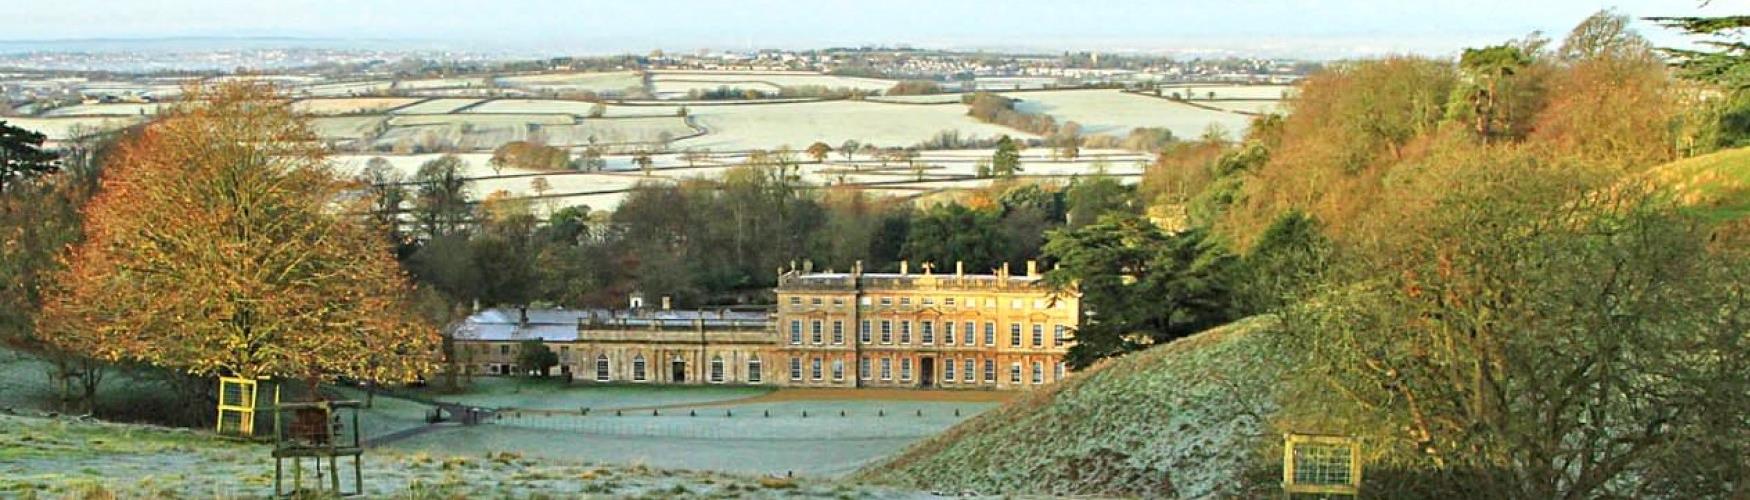 Dyrham Park in the frost